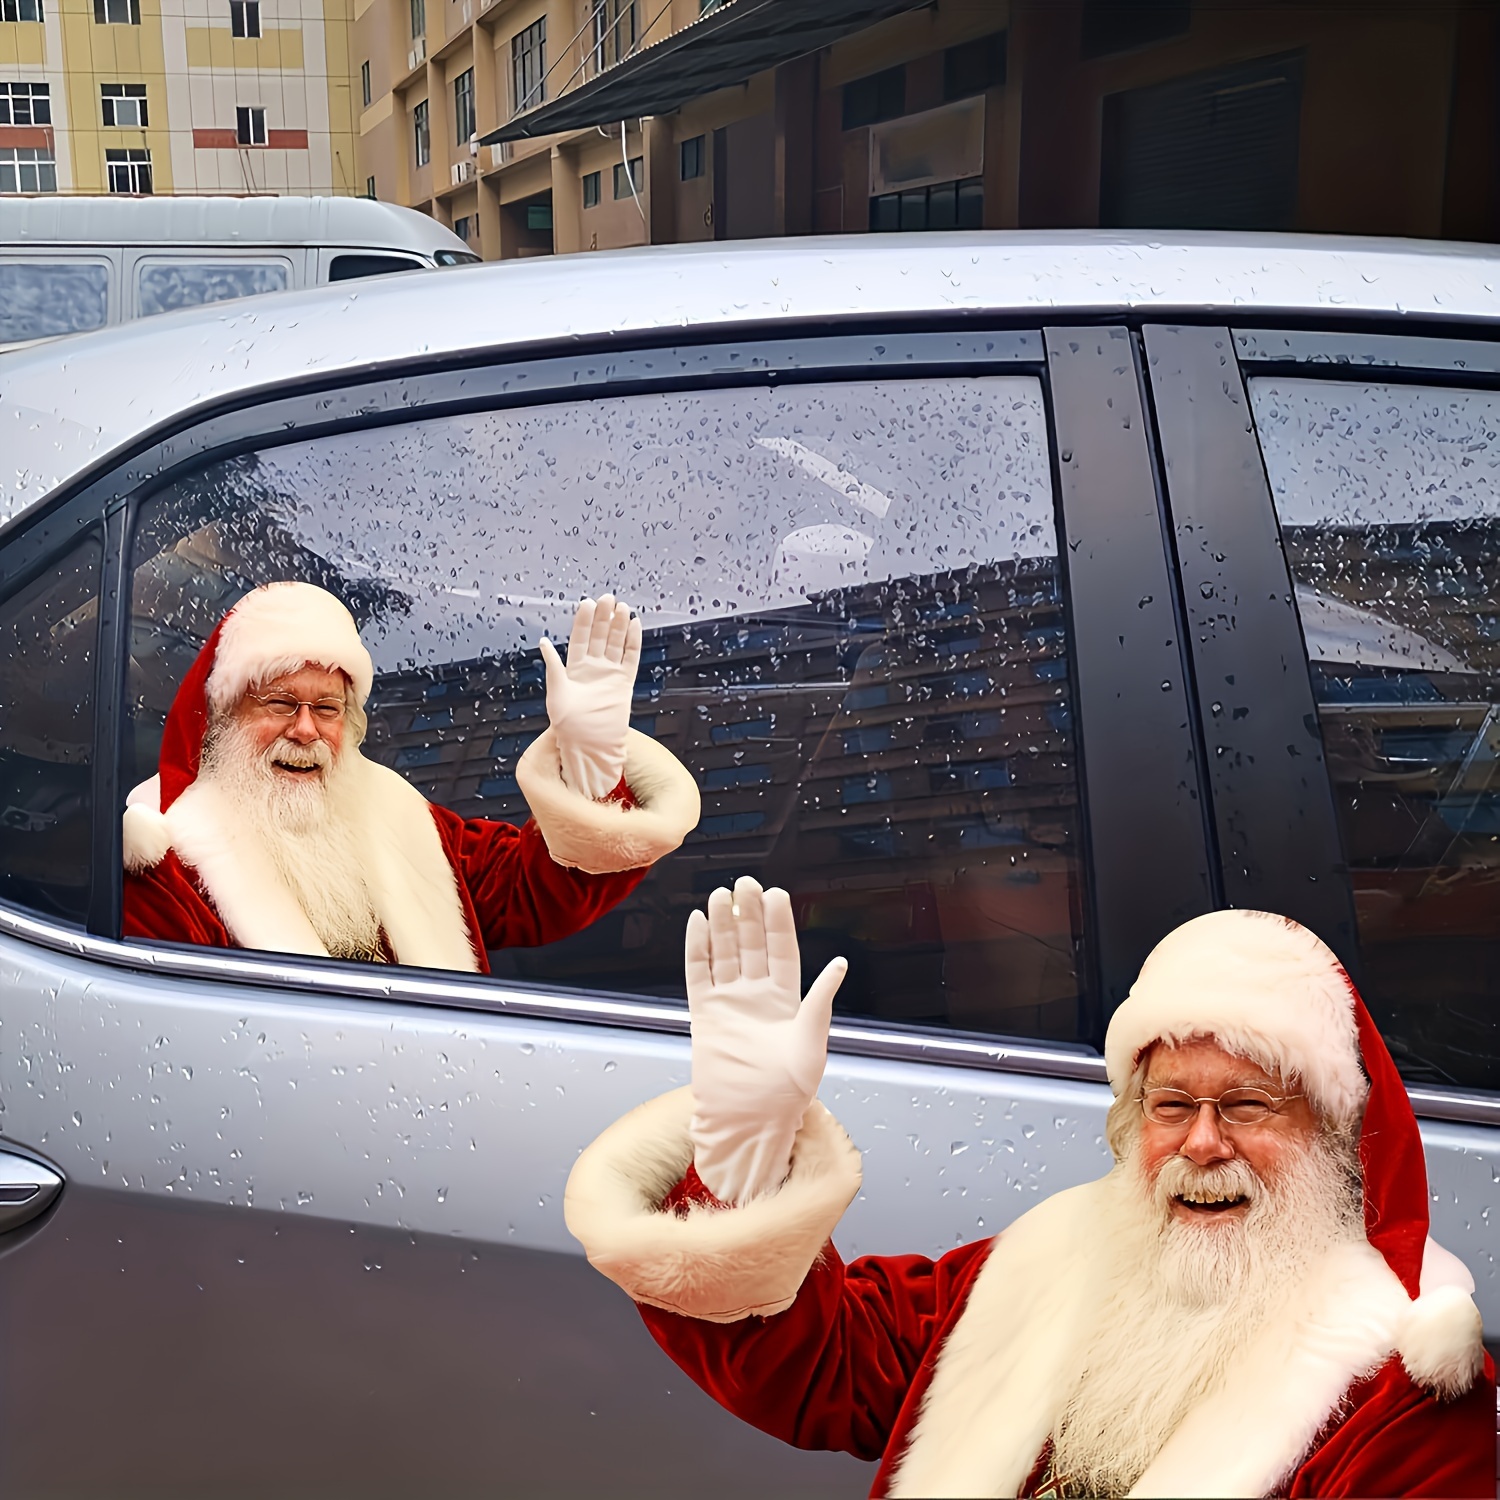 

1pc Waterproof Realistic Santa Claus Sticker Christmas Car Window Glass Decal Decoration Ride With Santa Funny Christmas Window Clings